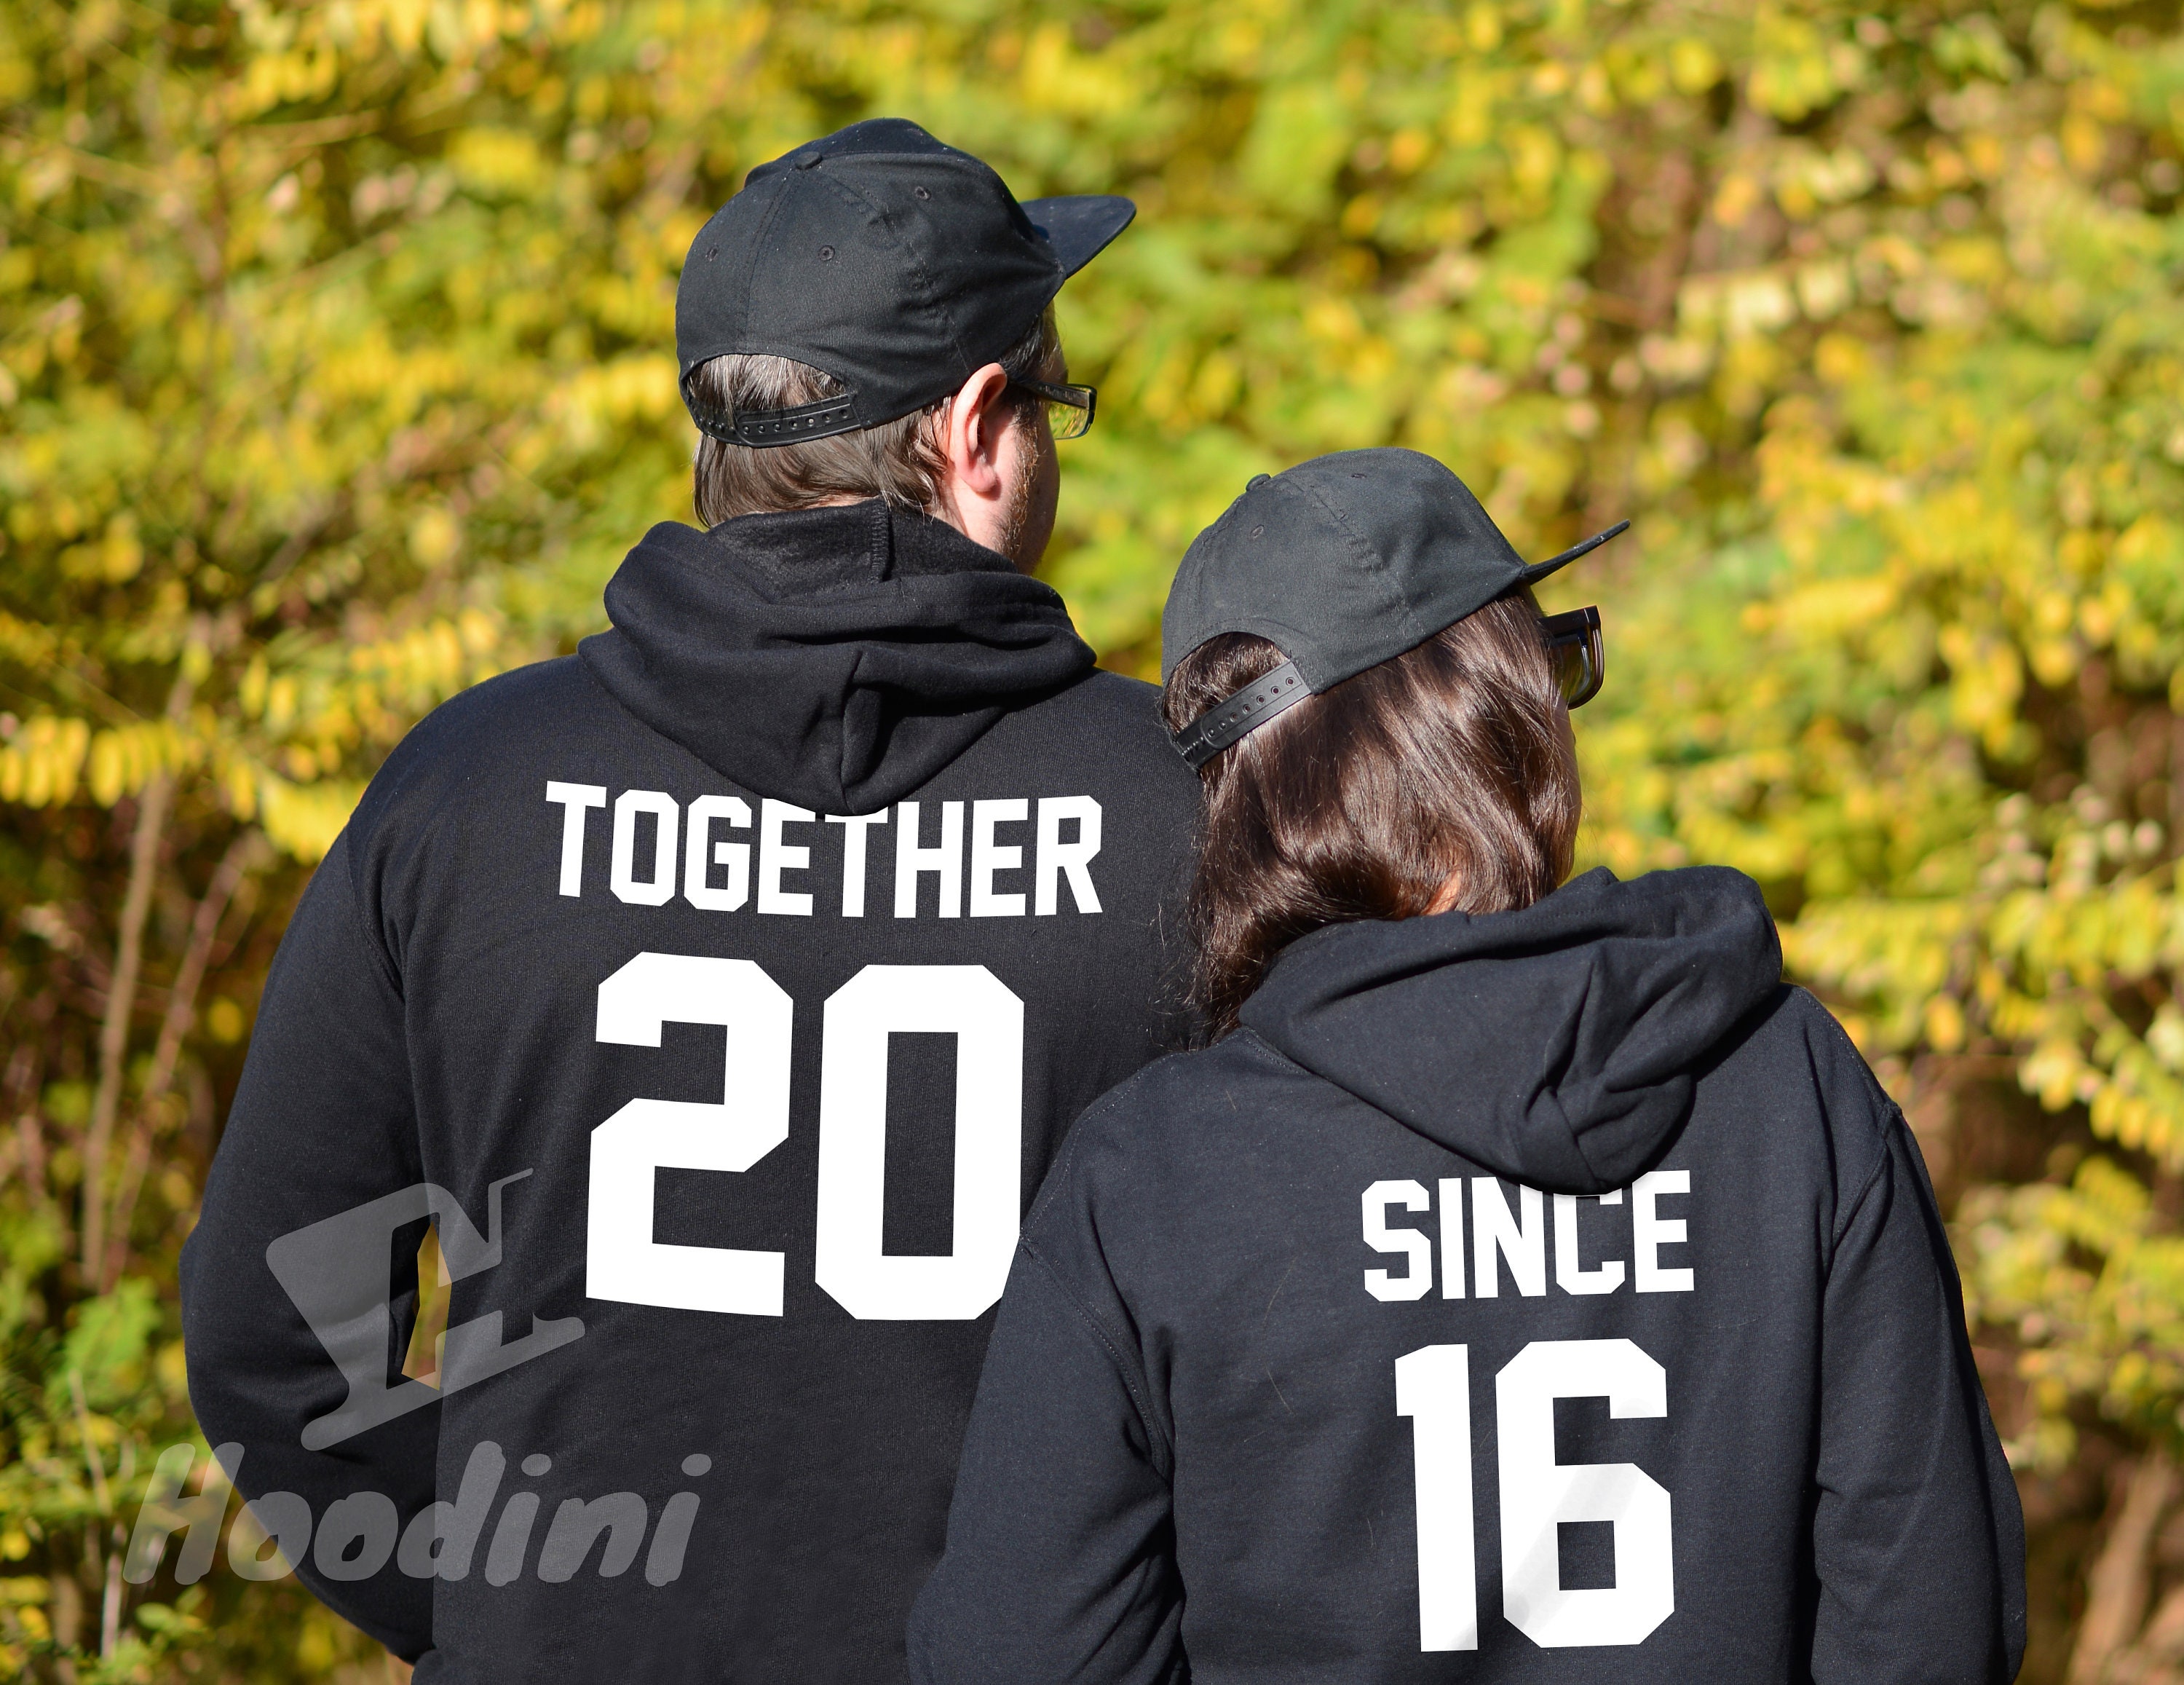 Couples Hoodies Couples Sweaters Couples Sweatshirts Together Since Hoodies  Couple Sweatshirts Anniversary Gift Couples Matching Hoodies -   Singapore